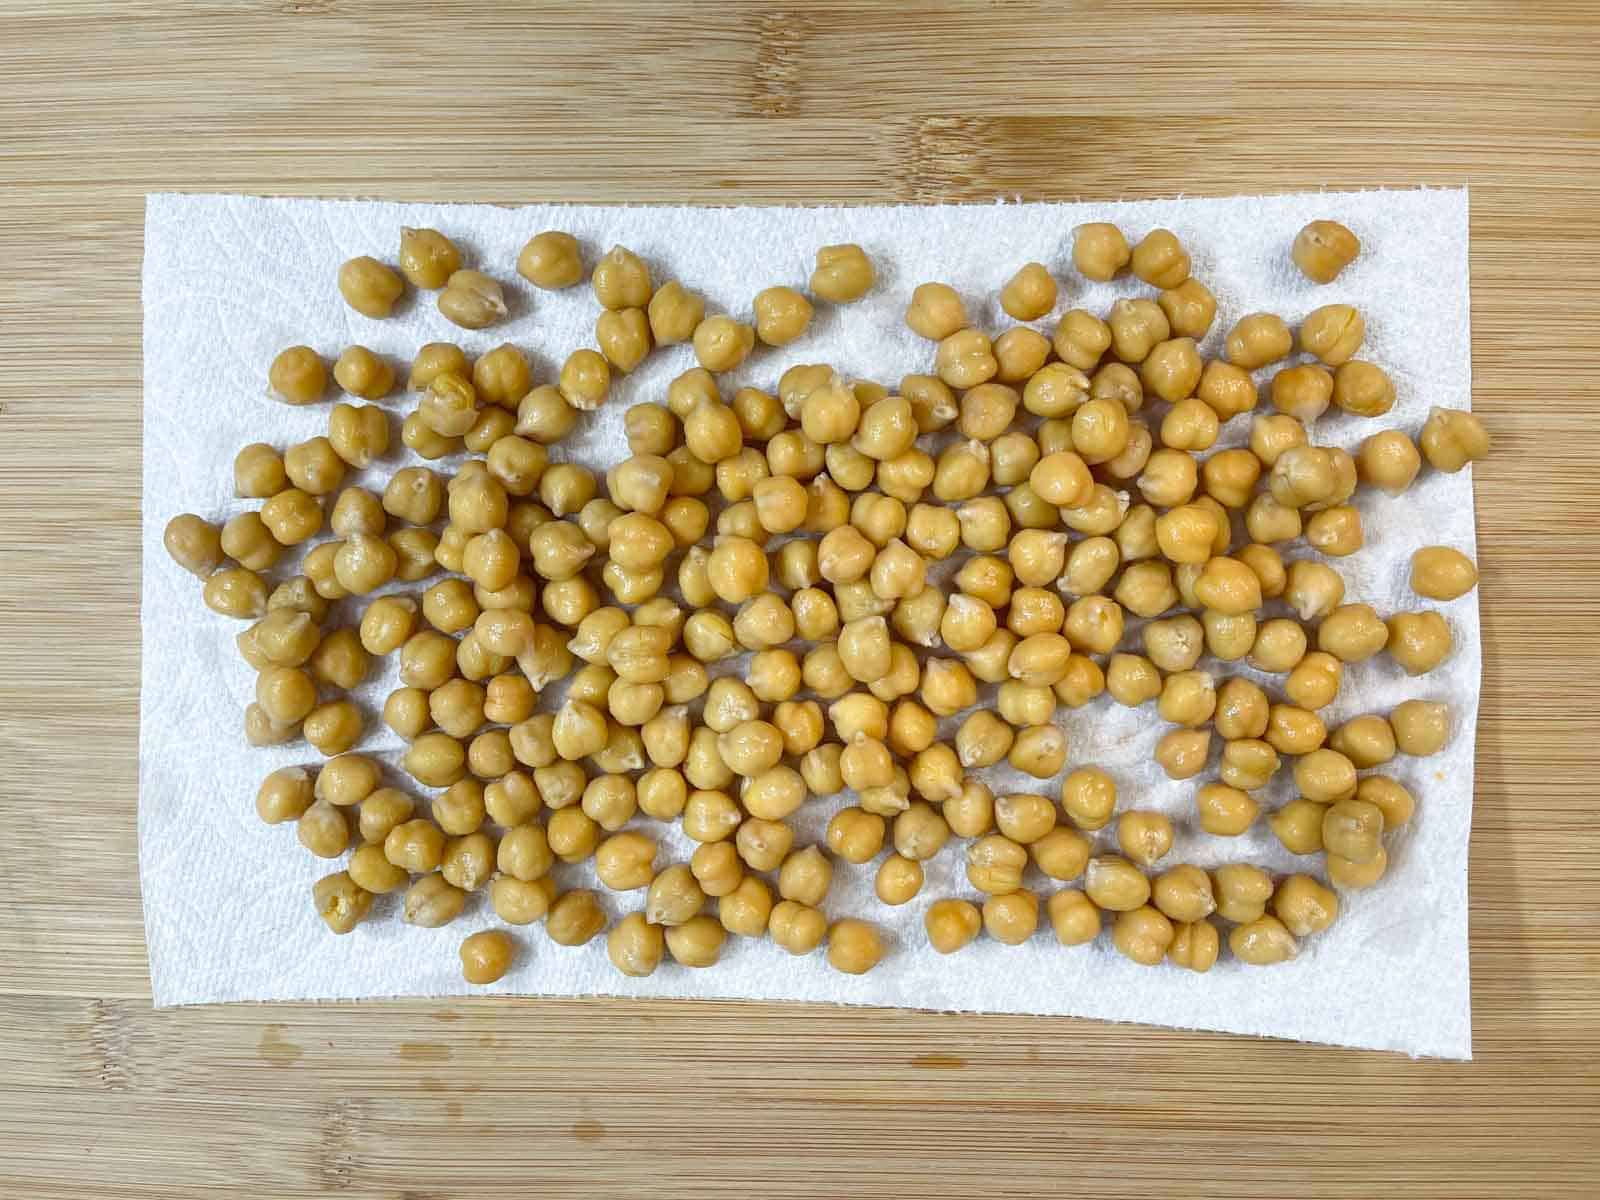 cooked chickpeas on a paper towel for drying